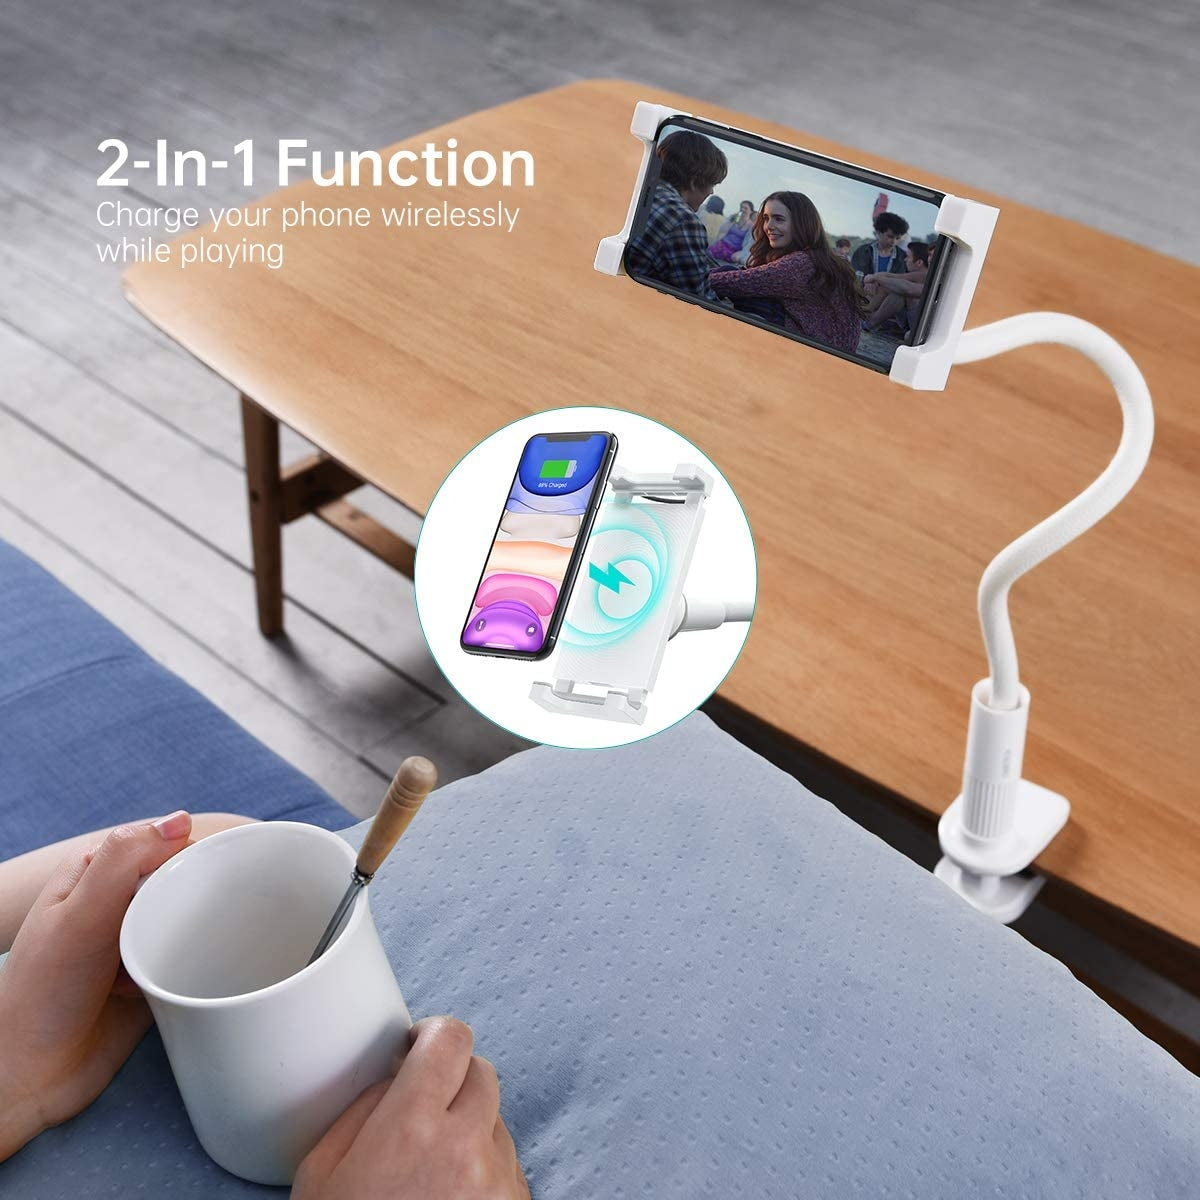 CHOETECH T548-S Wireless Charger with Flexible Holder Deals499